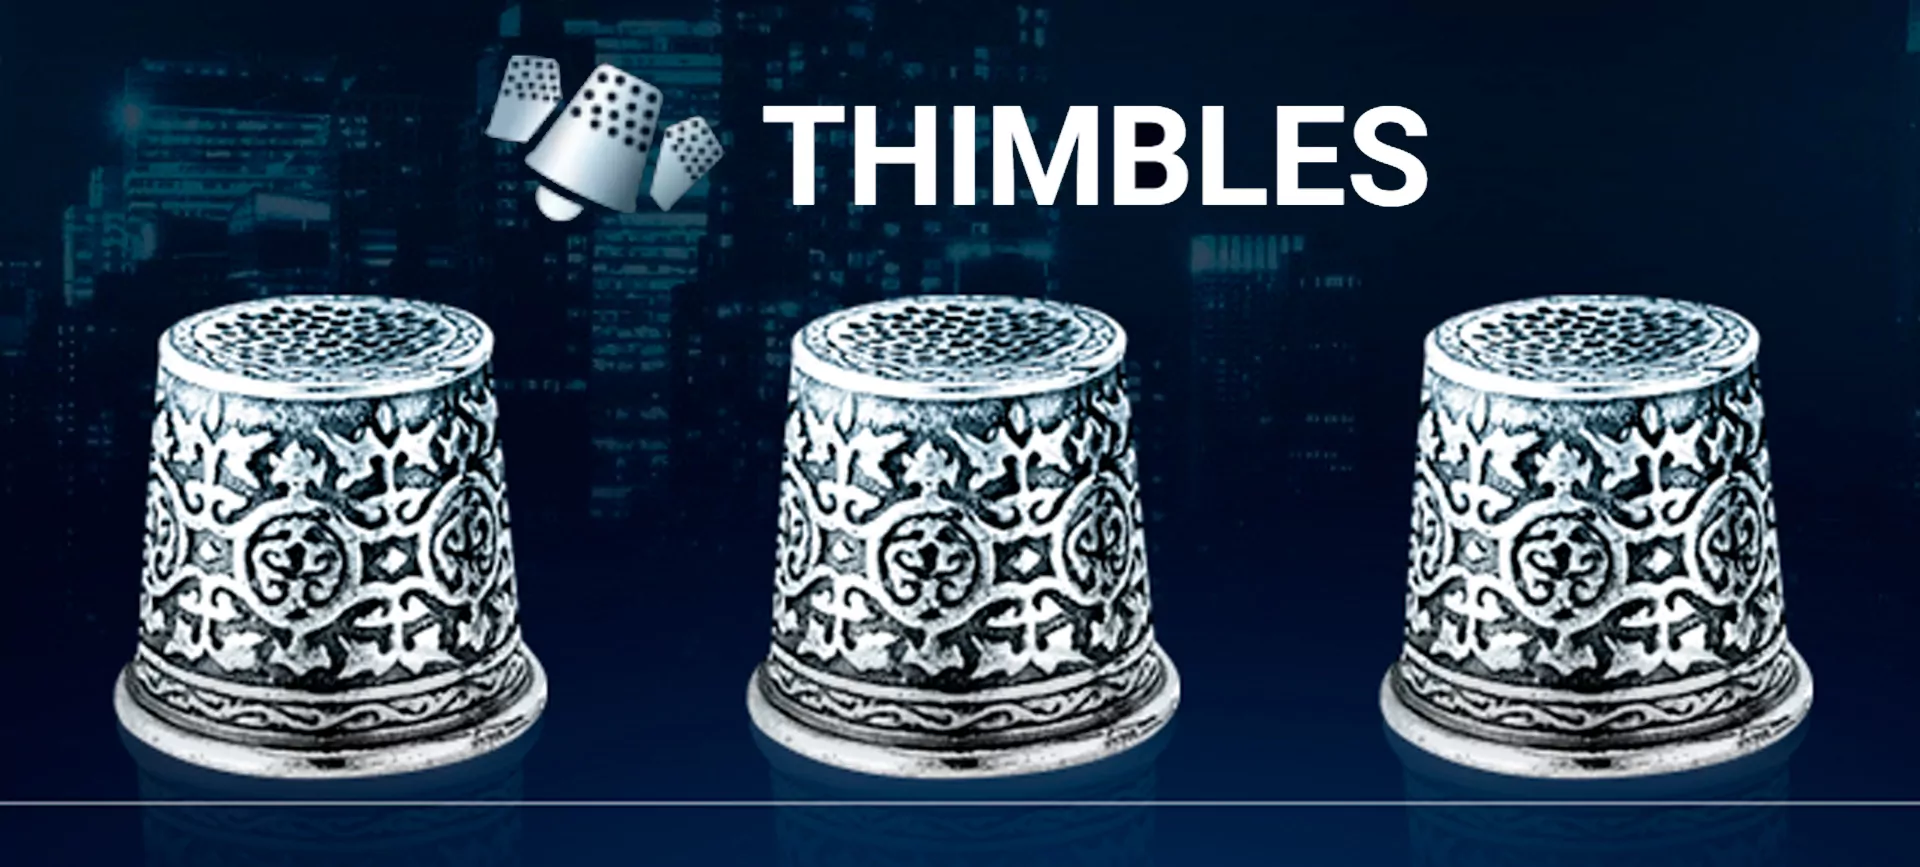 Play online in the Thimbles game.